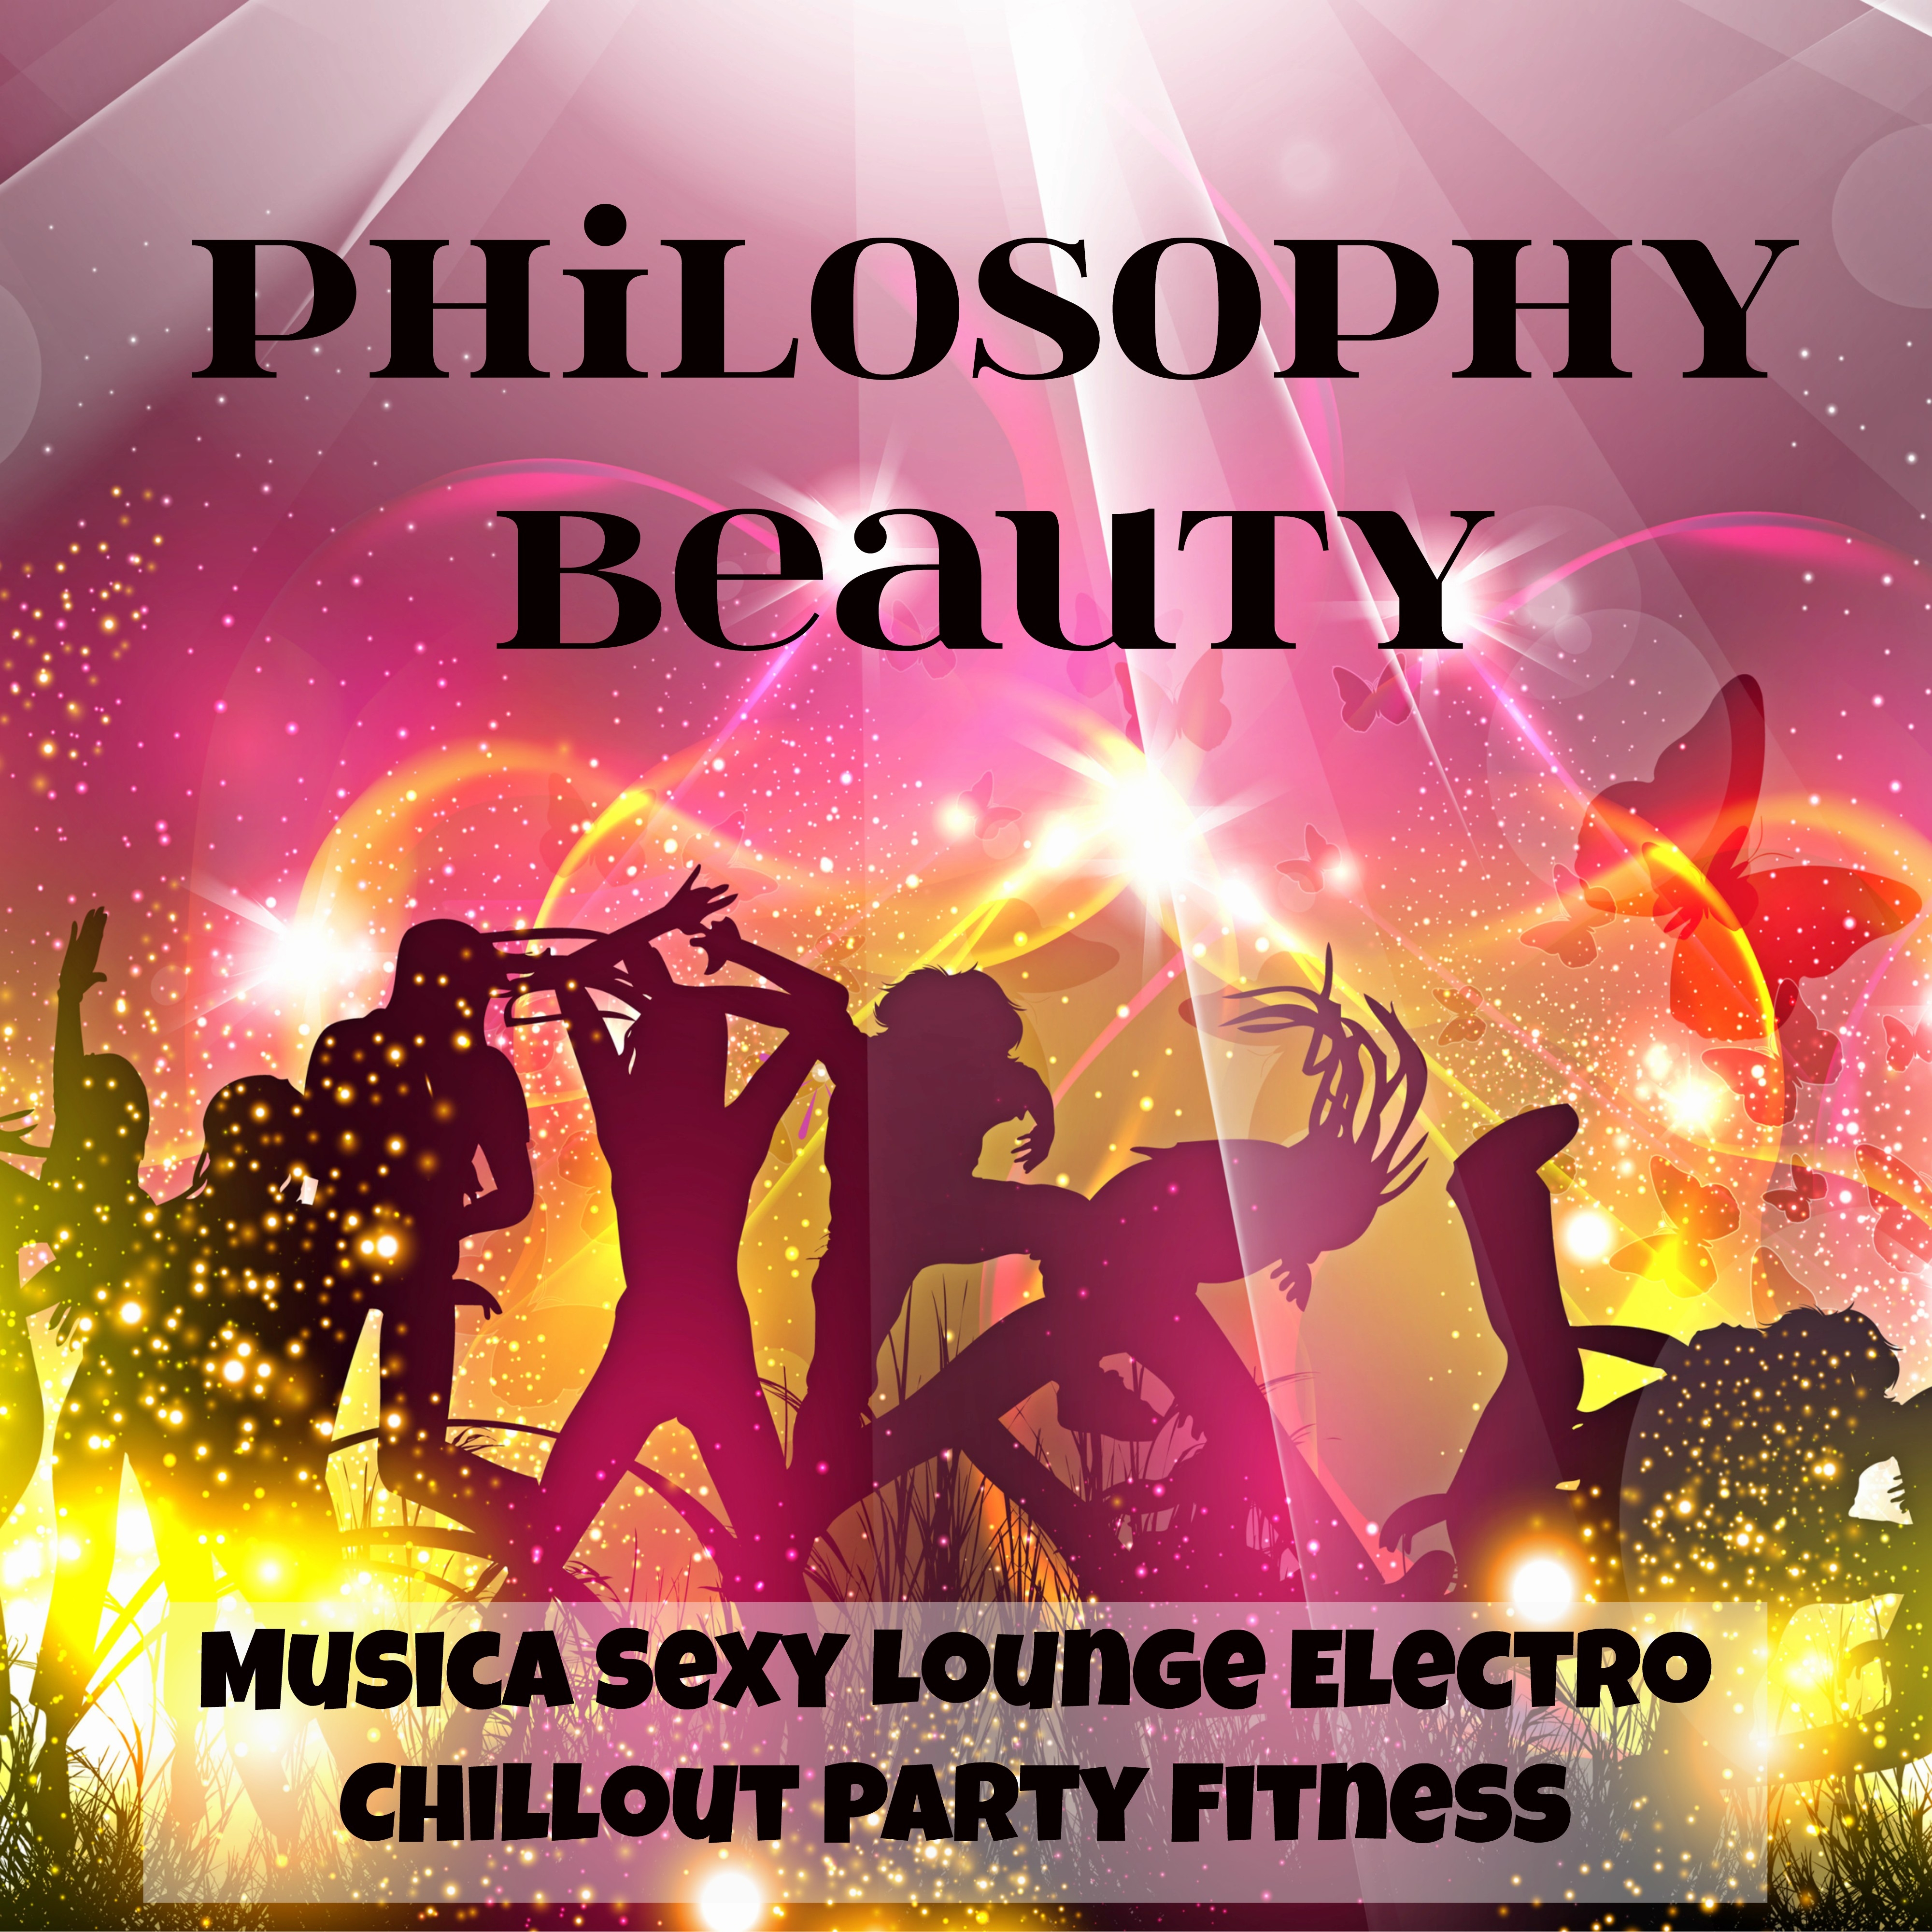 Philosophy Beauty - Musica **** Lounge Electro Chillout Party Fitness per Forti Emozioni